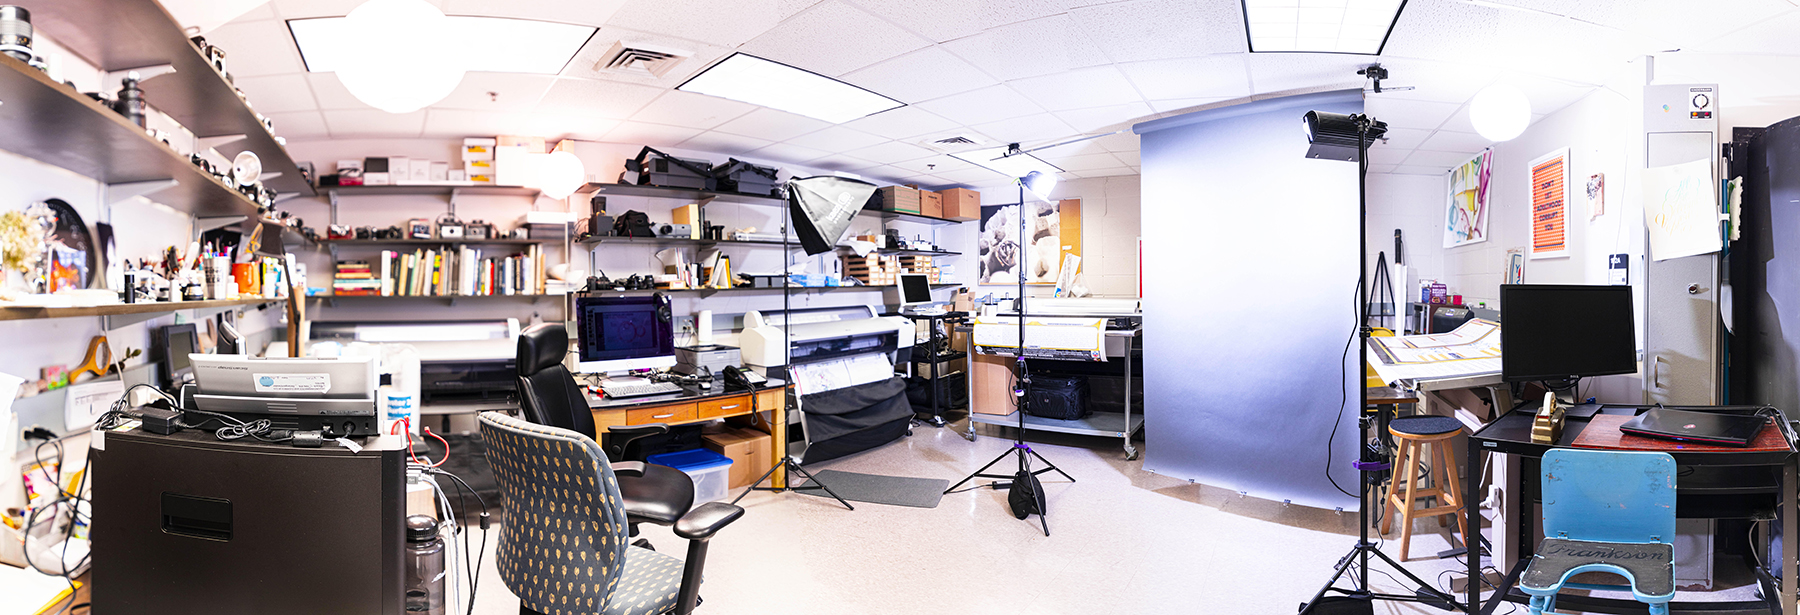 Studio lab with photography equipment and printers